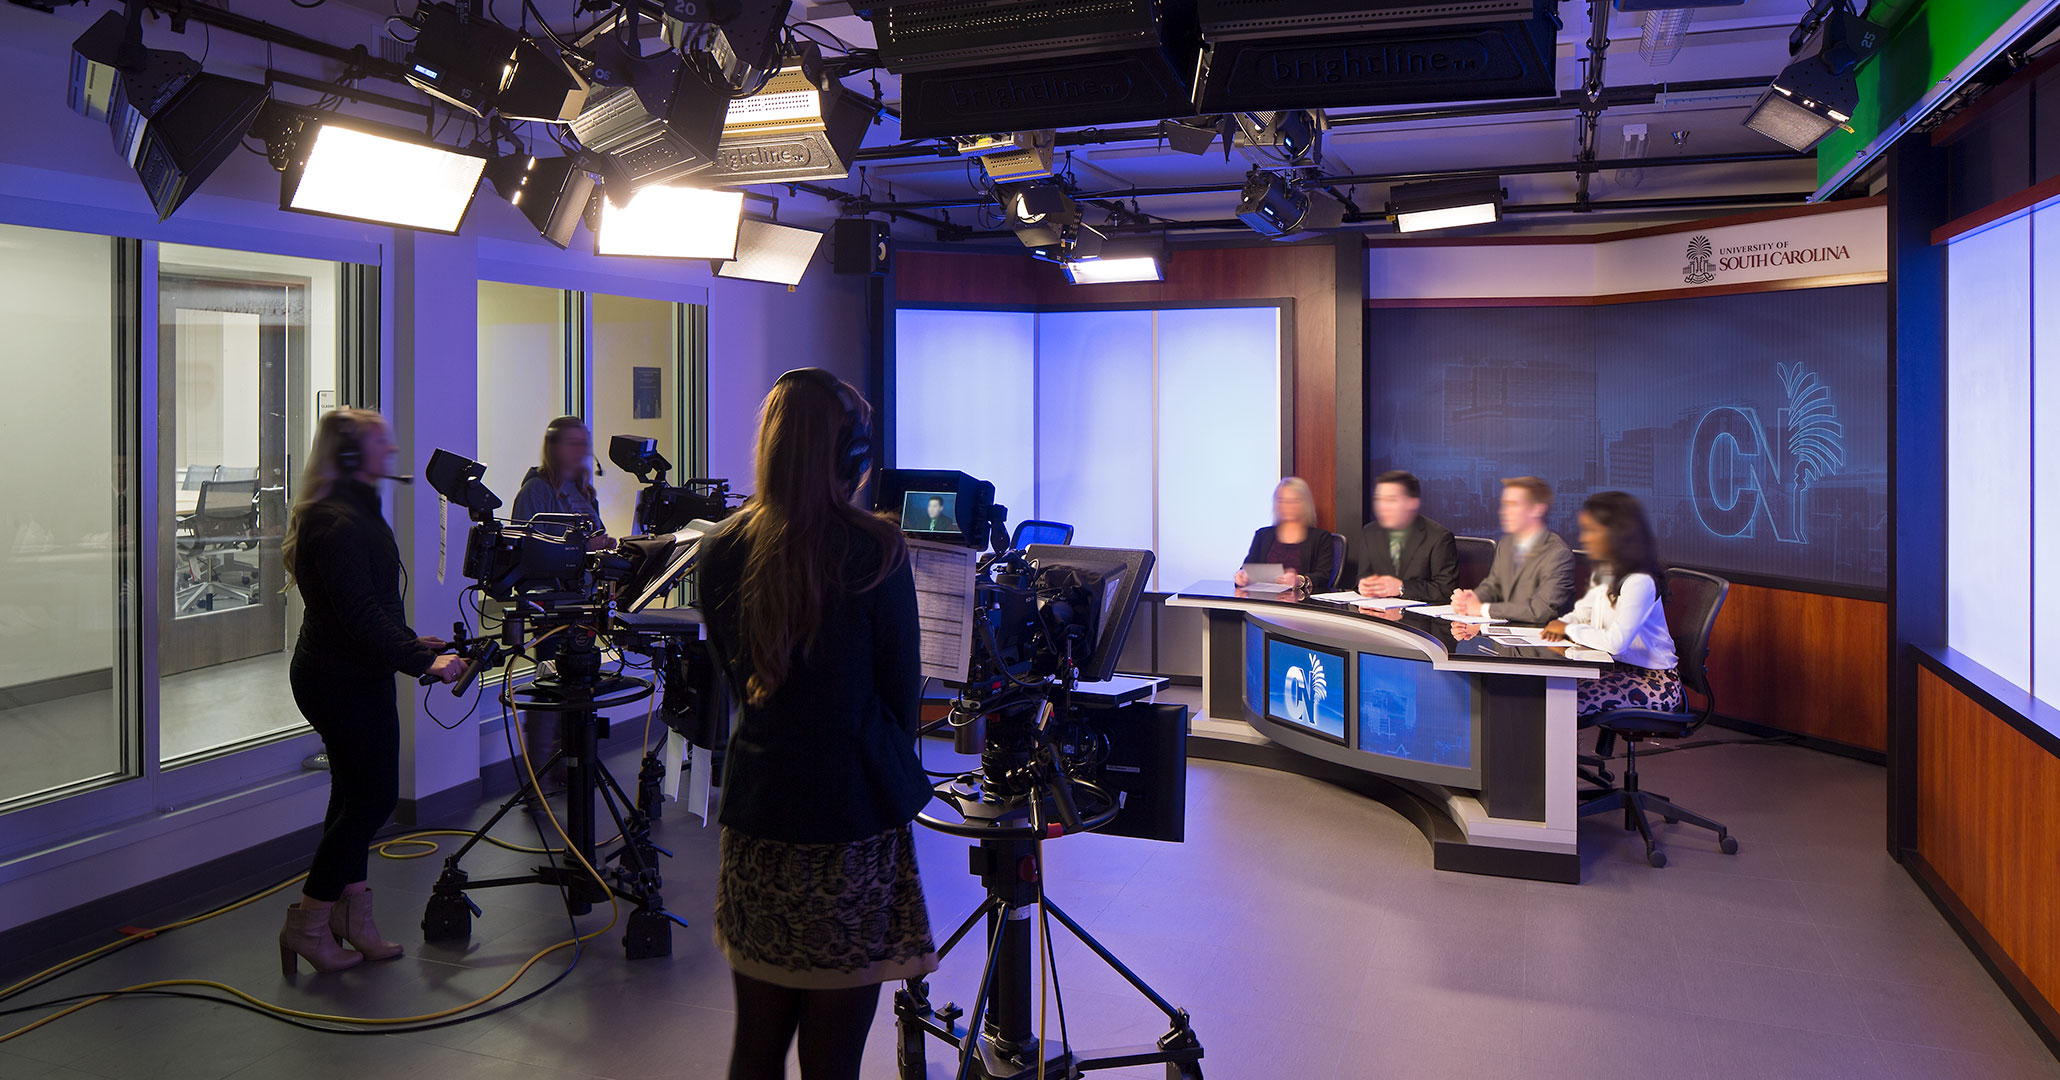 University of South Carolina worked with Boudreaux architects to design a news room at the School of Journalism.